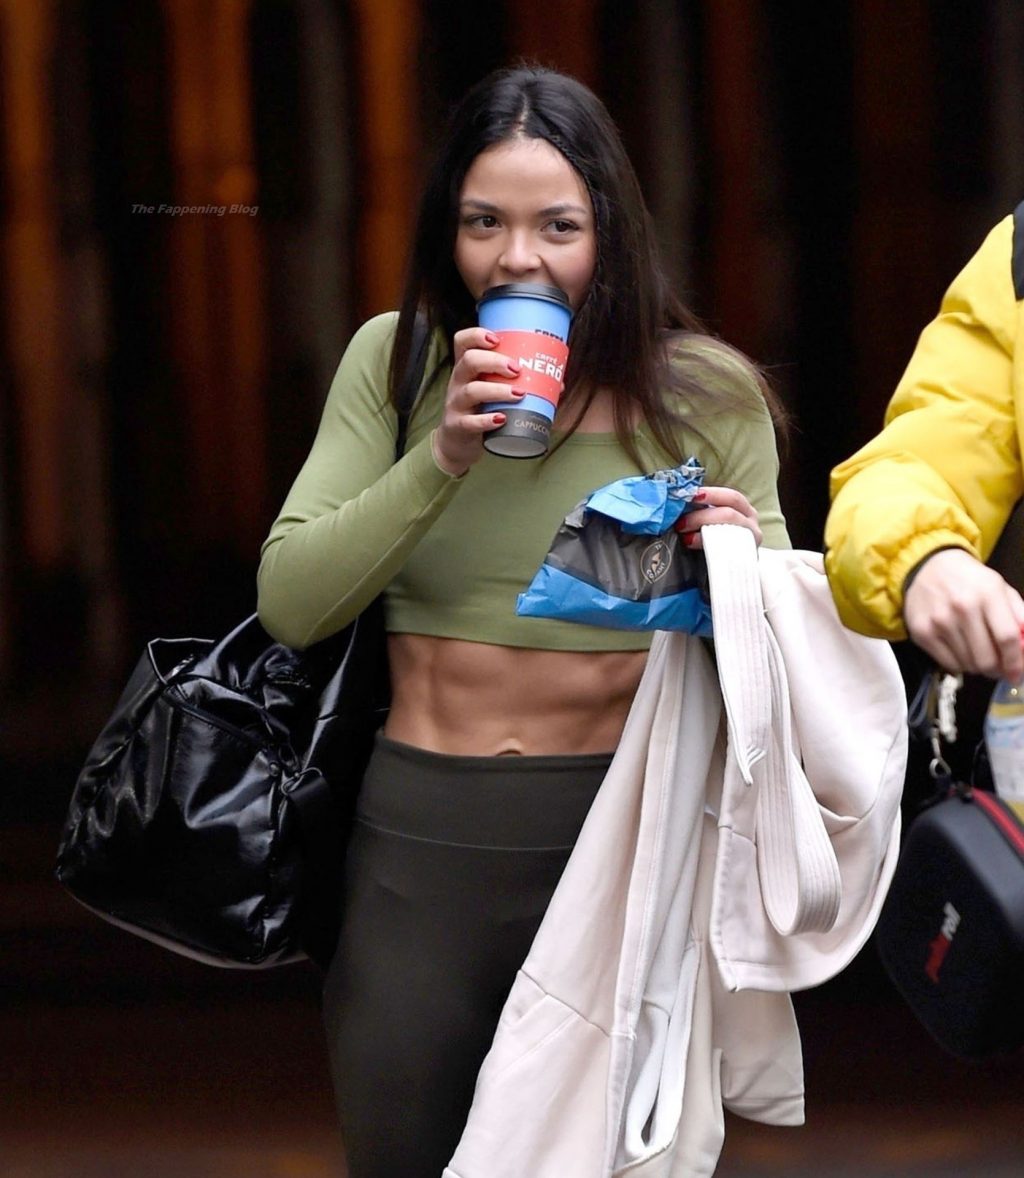 Vanessa Bauer Shows Off Her Abs and Pokies in Blackpool (41 Photos)